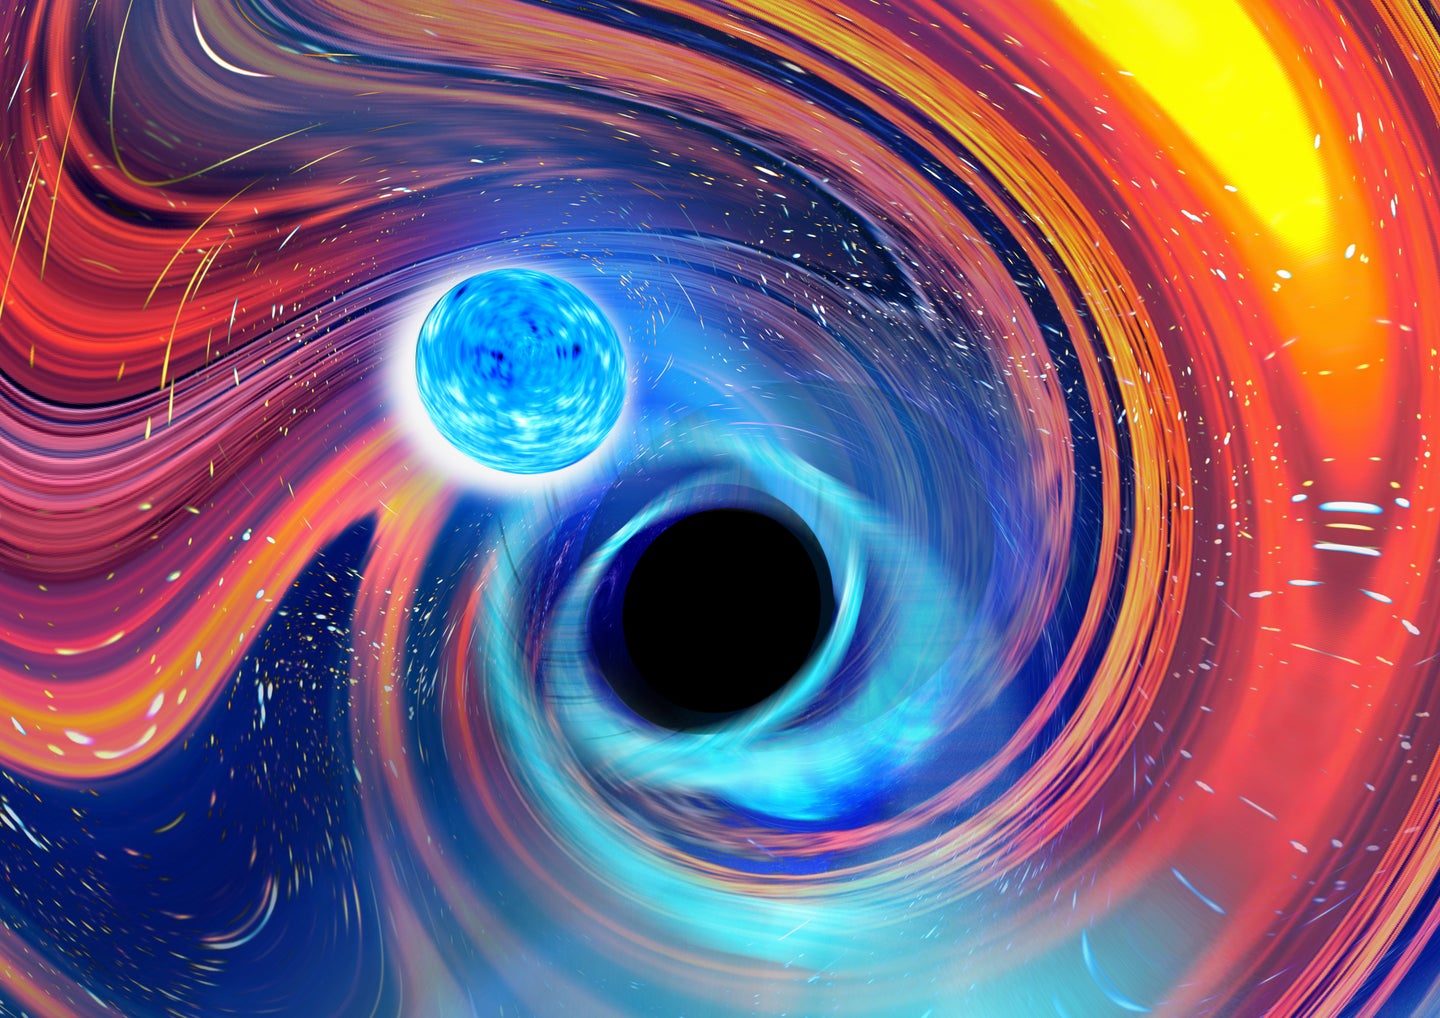 An artistic image inspired by a black hole-neutron star merger event, with lots of blue and red hues.